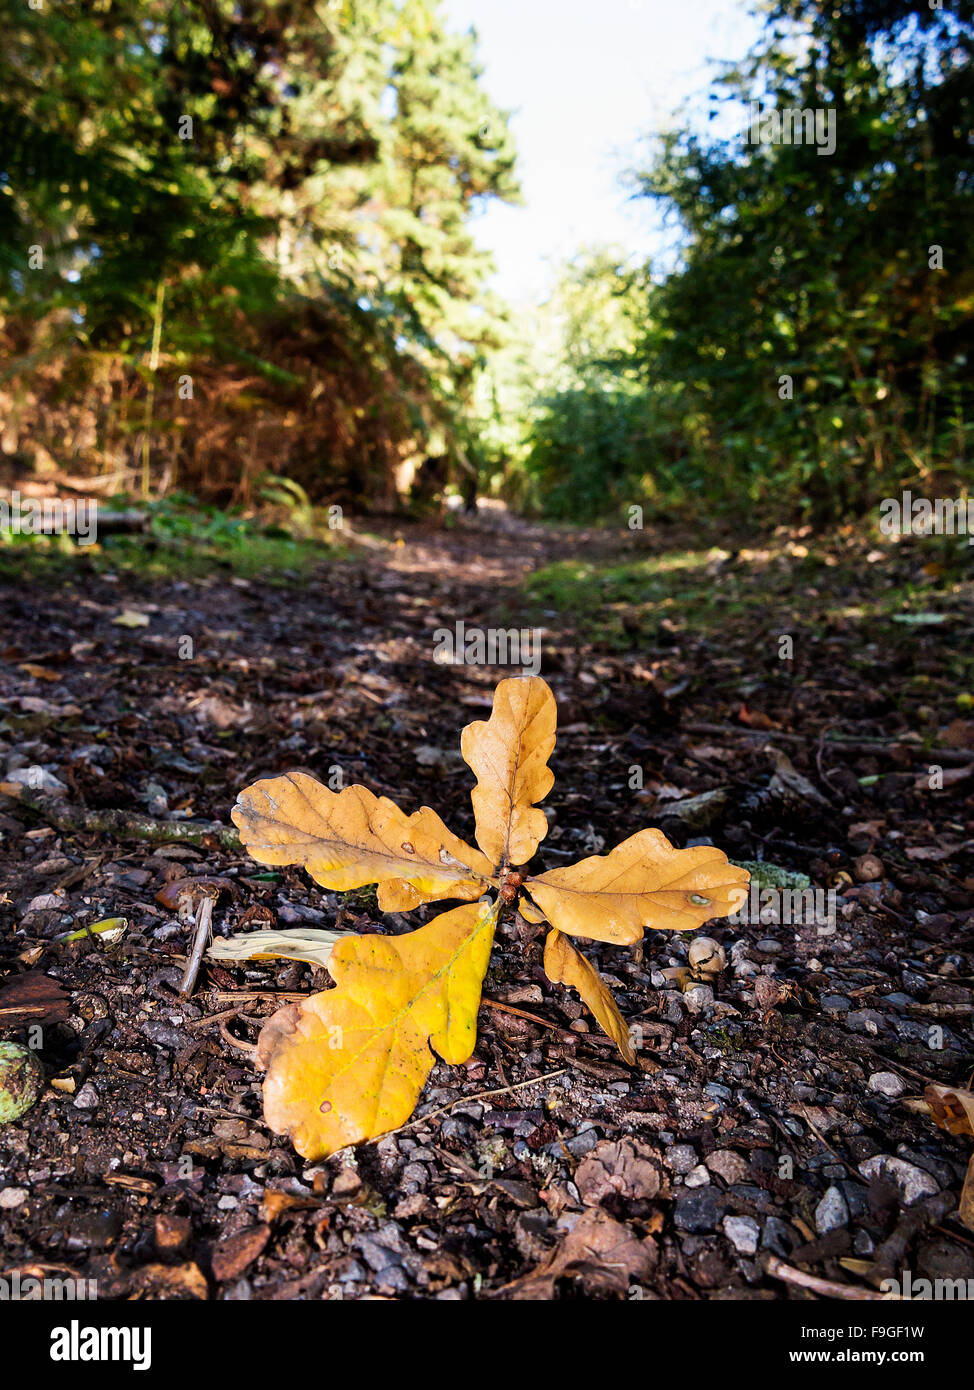 Sprig of oak leaves lying in the gravel path at  Daresbury Firs Stock Photo